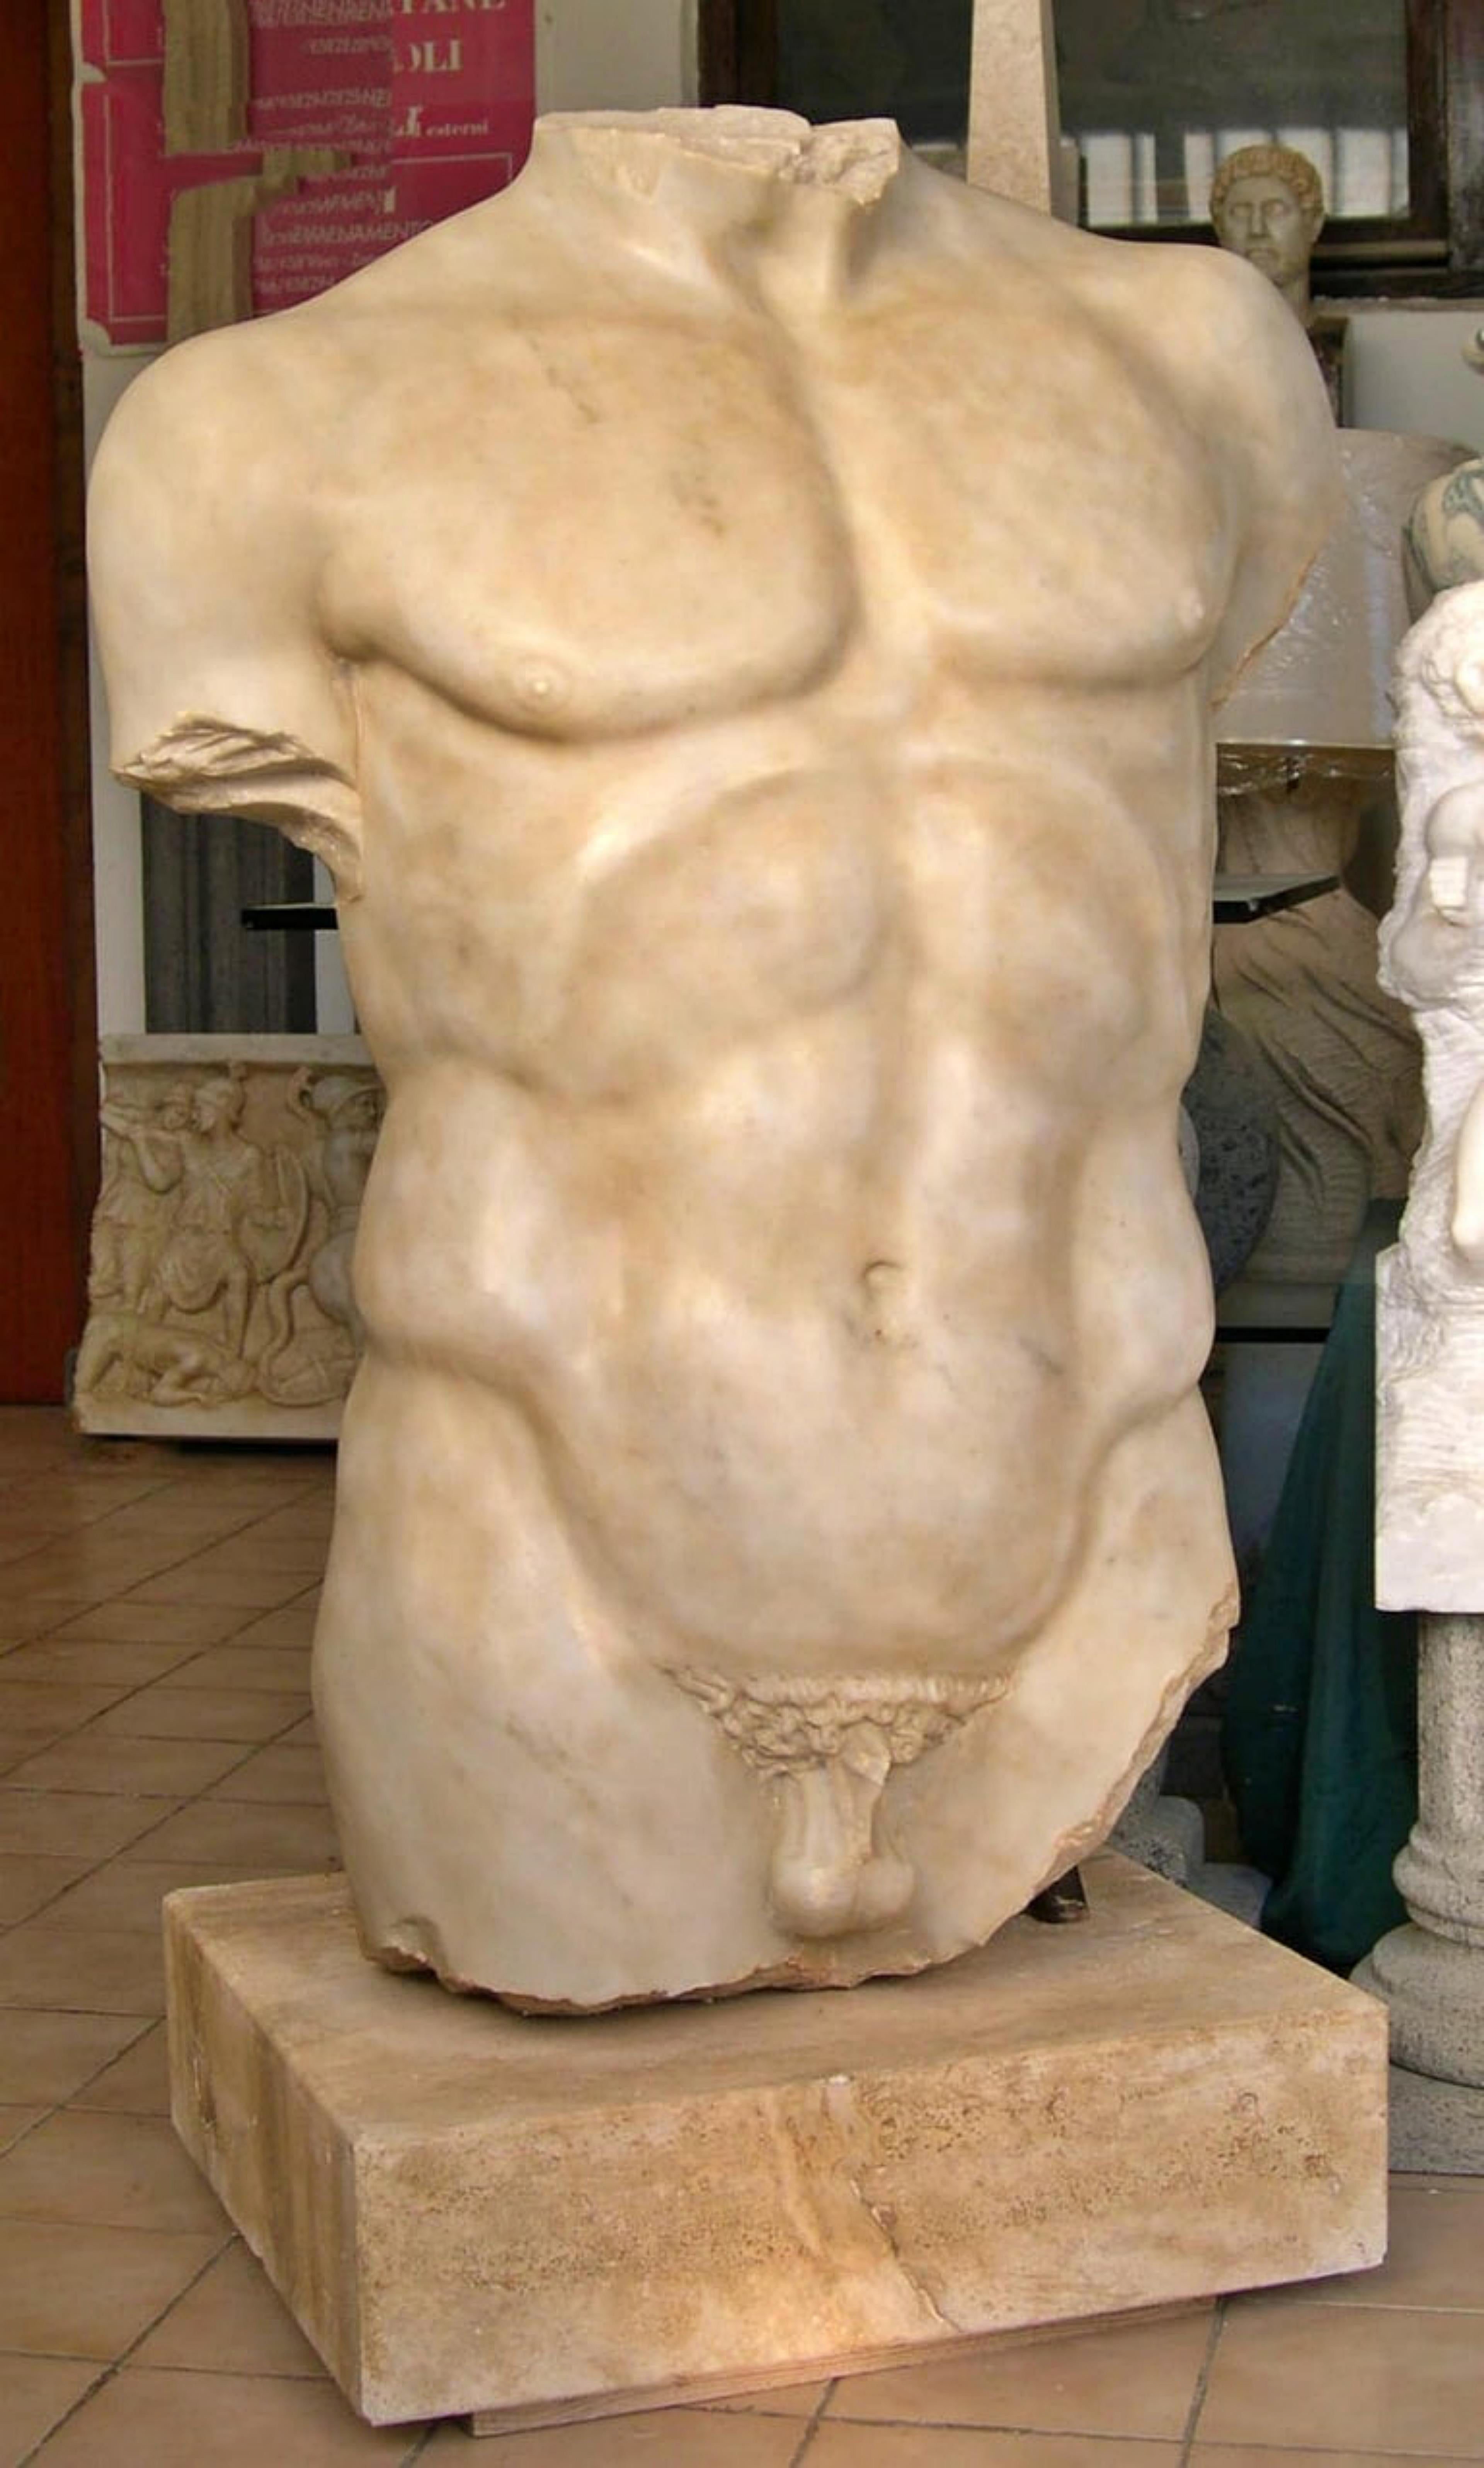 Magnificent Italian Torso Carrara Marble Early 20th Century H: 127cm
The height is including the base
good conditions
weight: 800kg
This sculpture needs export certificate
Delivery time : 1,5 / 2 months for documents preparation.

Important Note: